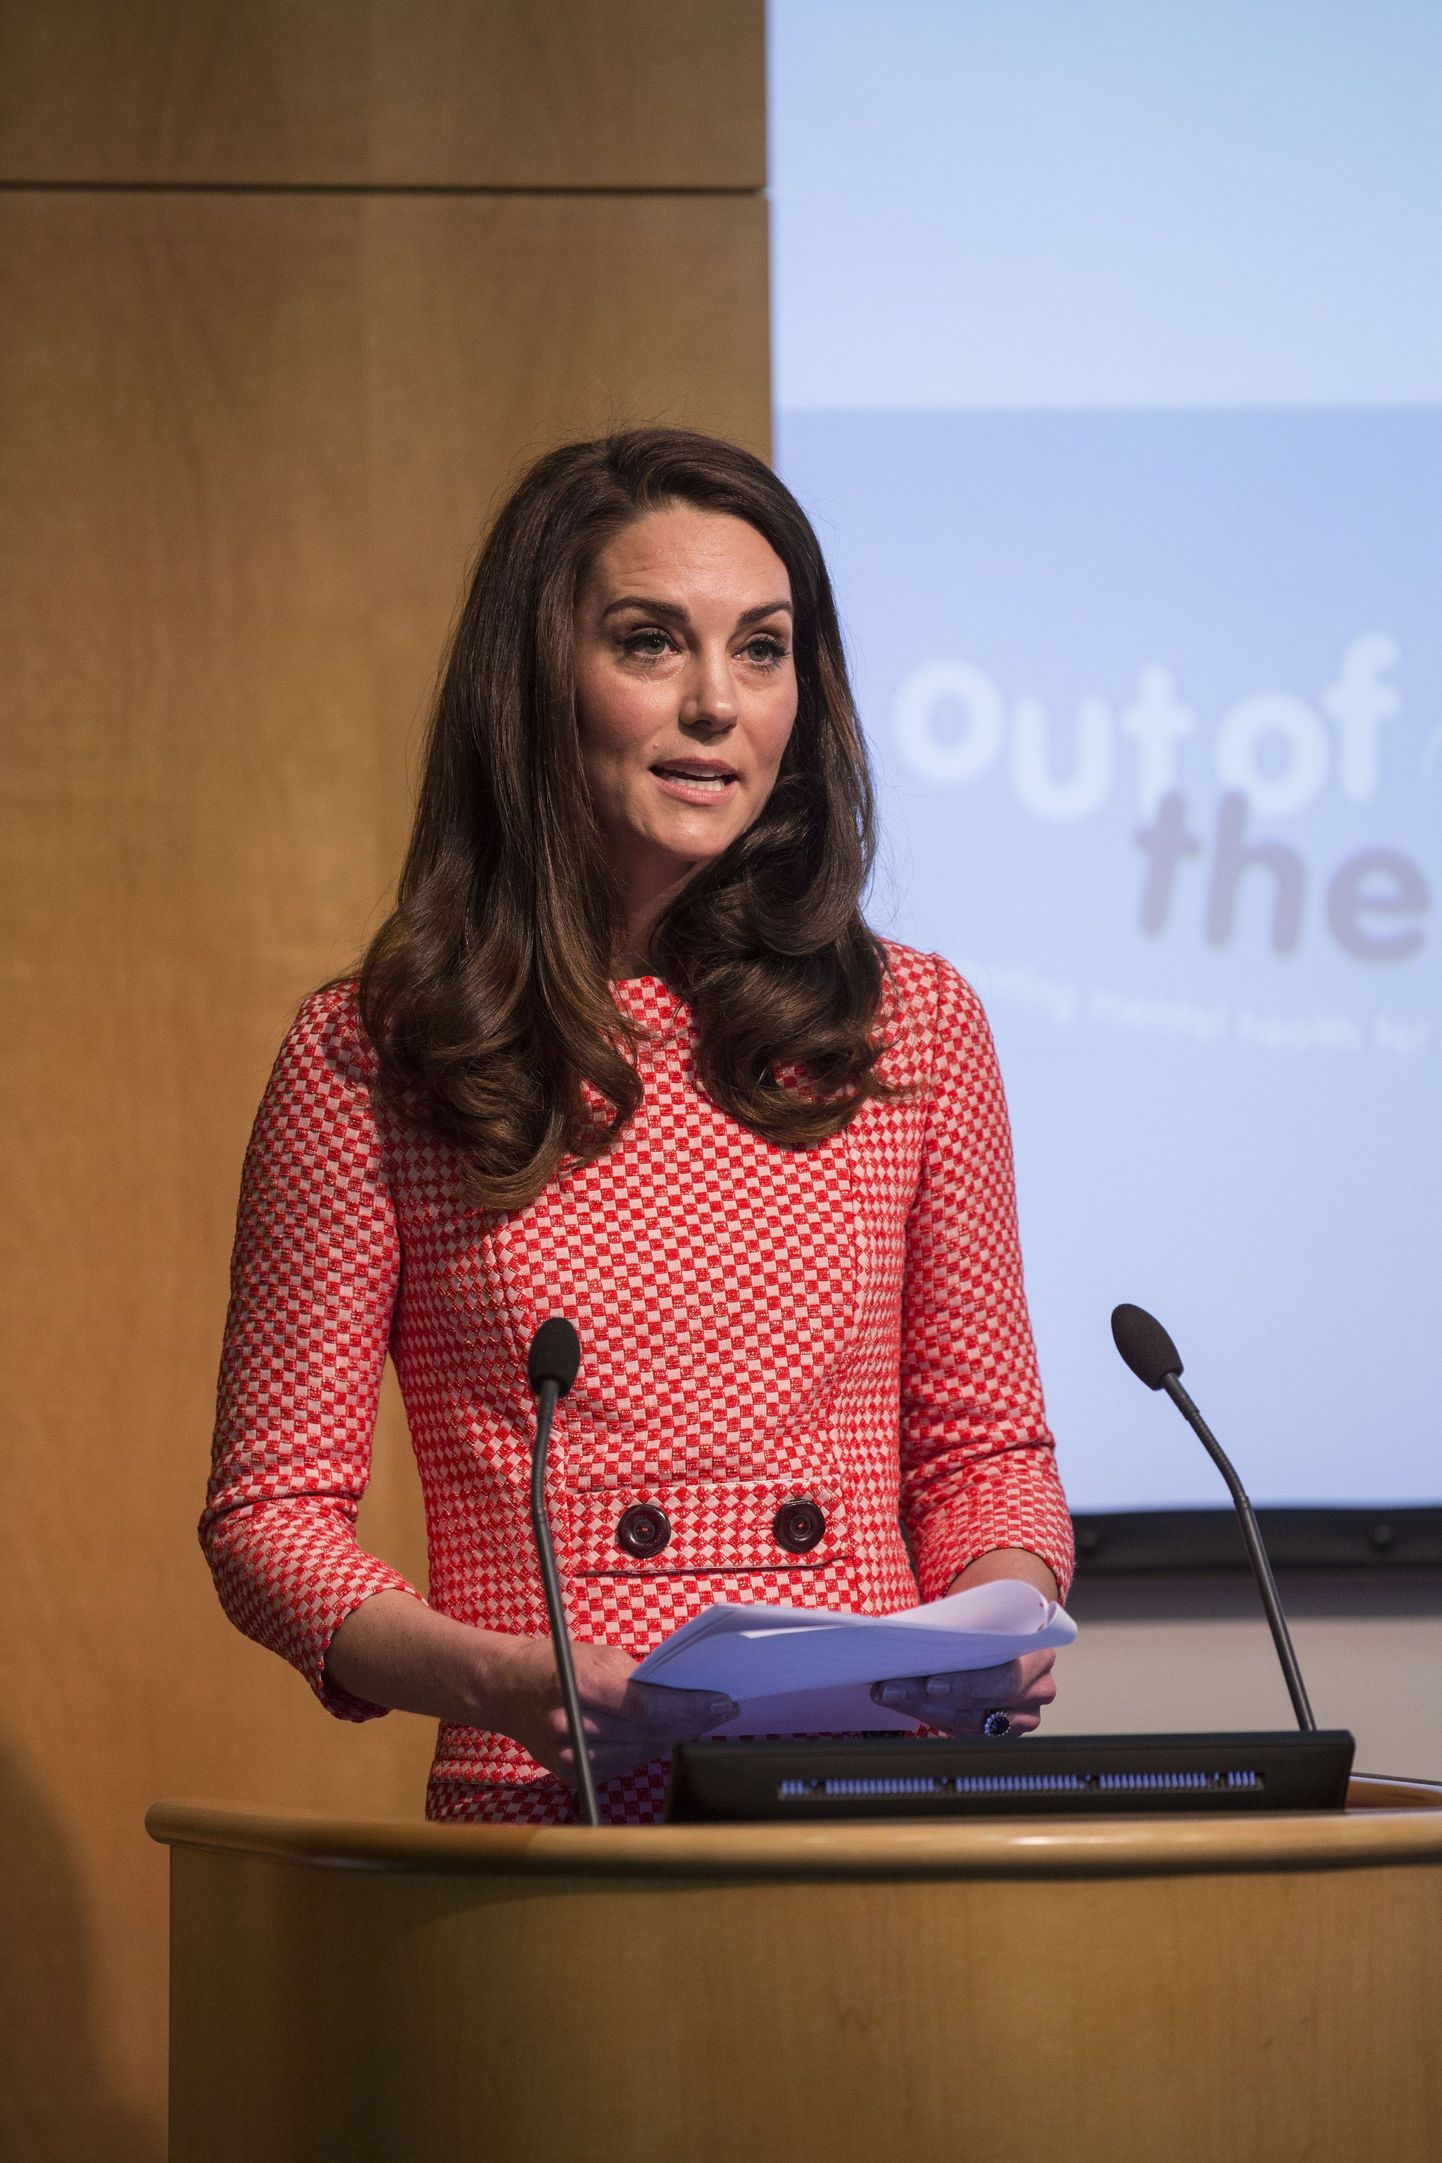 The Duchess of Cambridge at the Royal College of Obstetricians and Gynecologists in London.